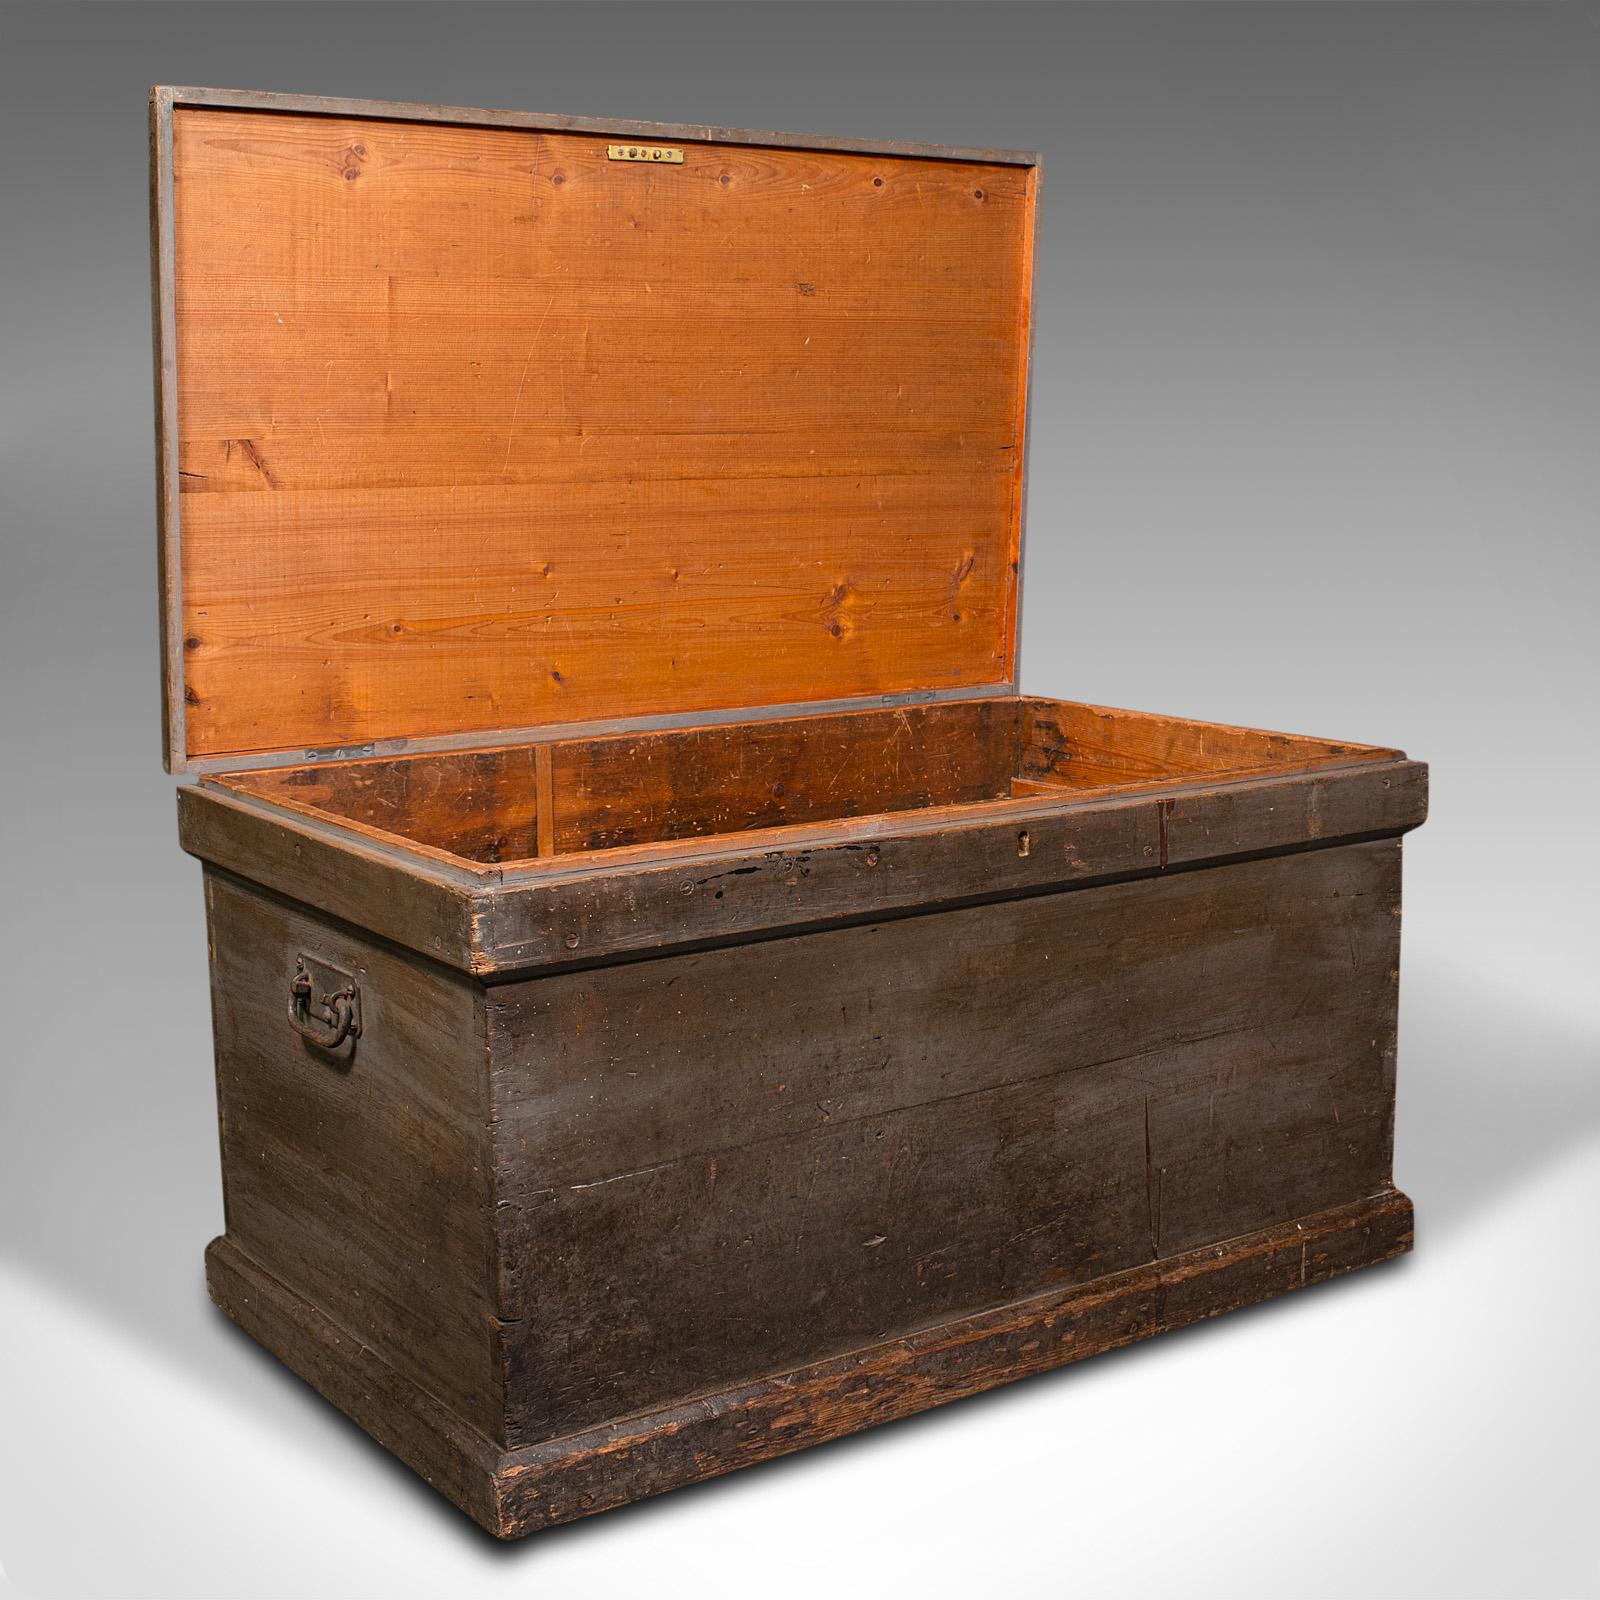 This is an antique workman's chest. An English, pine tool chest or coffee table, dating to the Victorian period and later, circa 1880.

Robust and substantial, with a useful fitted interior
Displays a desirable aged patina throughout
Stained pine